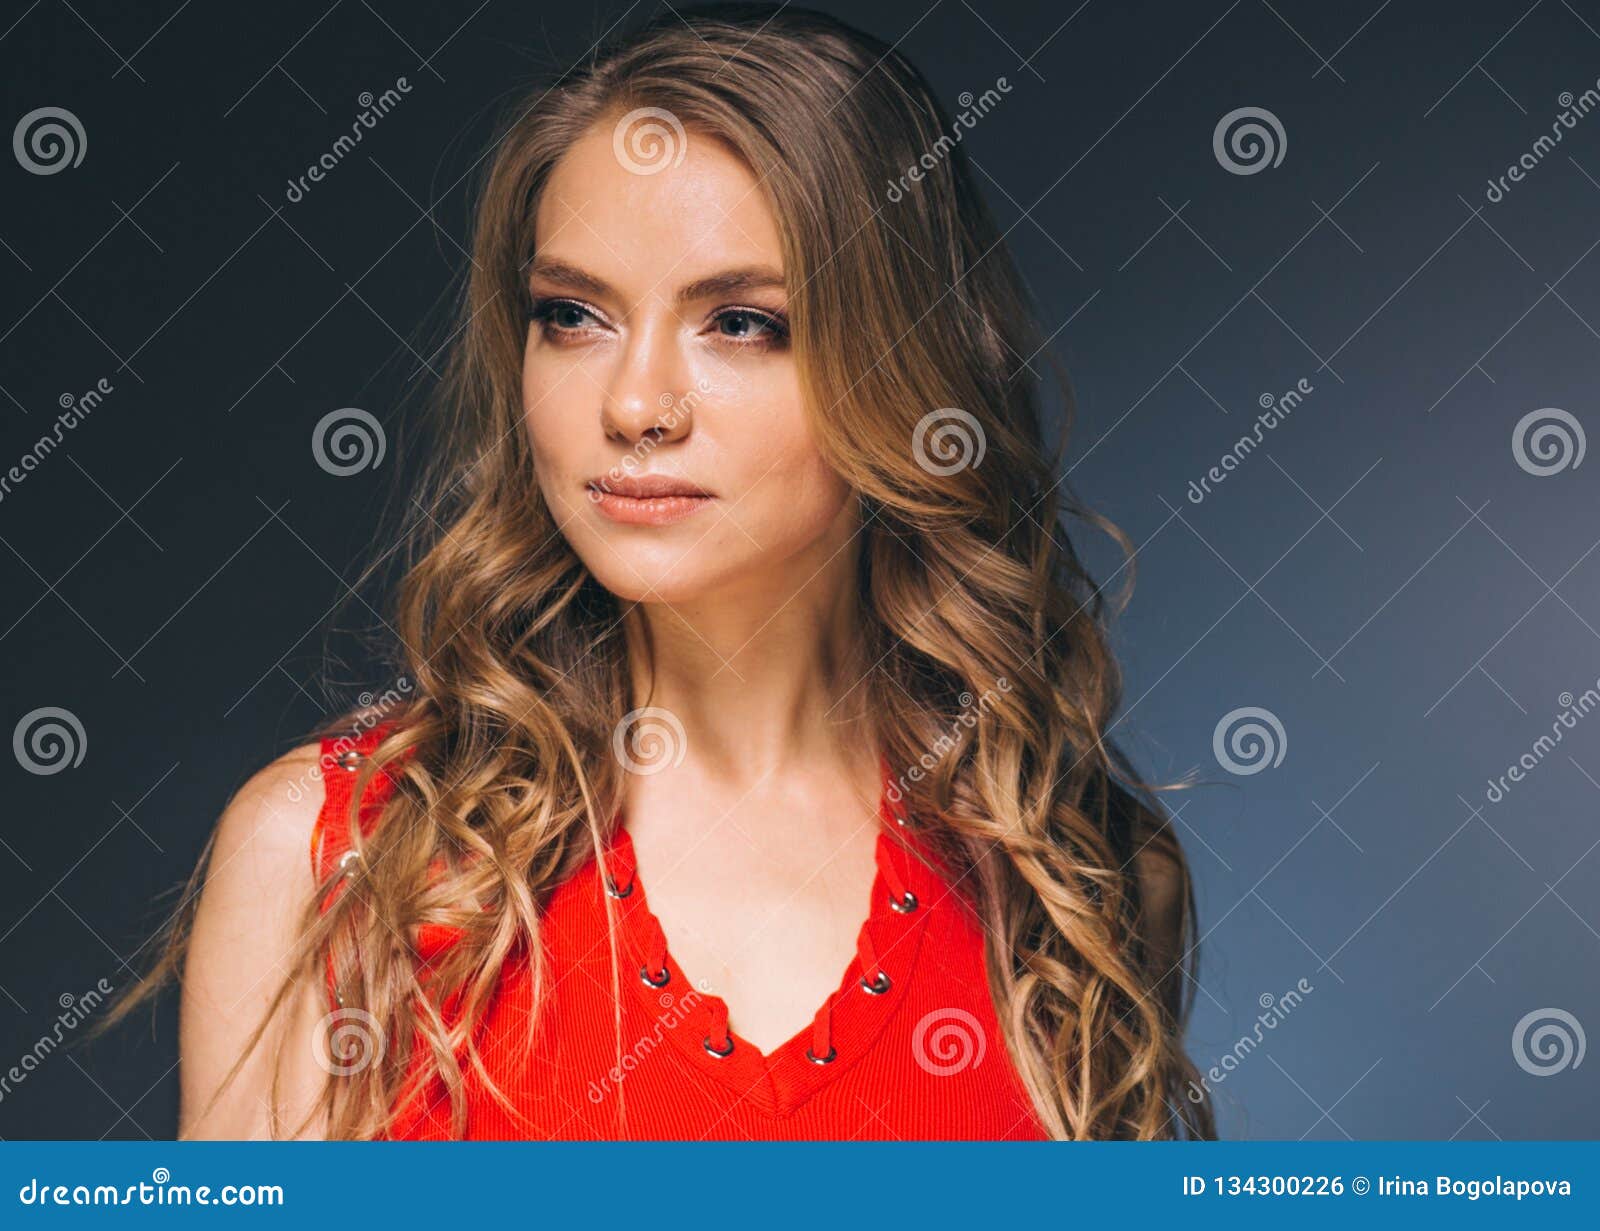 Woman in Red Dress with Long Blonde Hair Stock Photo - Image of chest ...